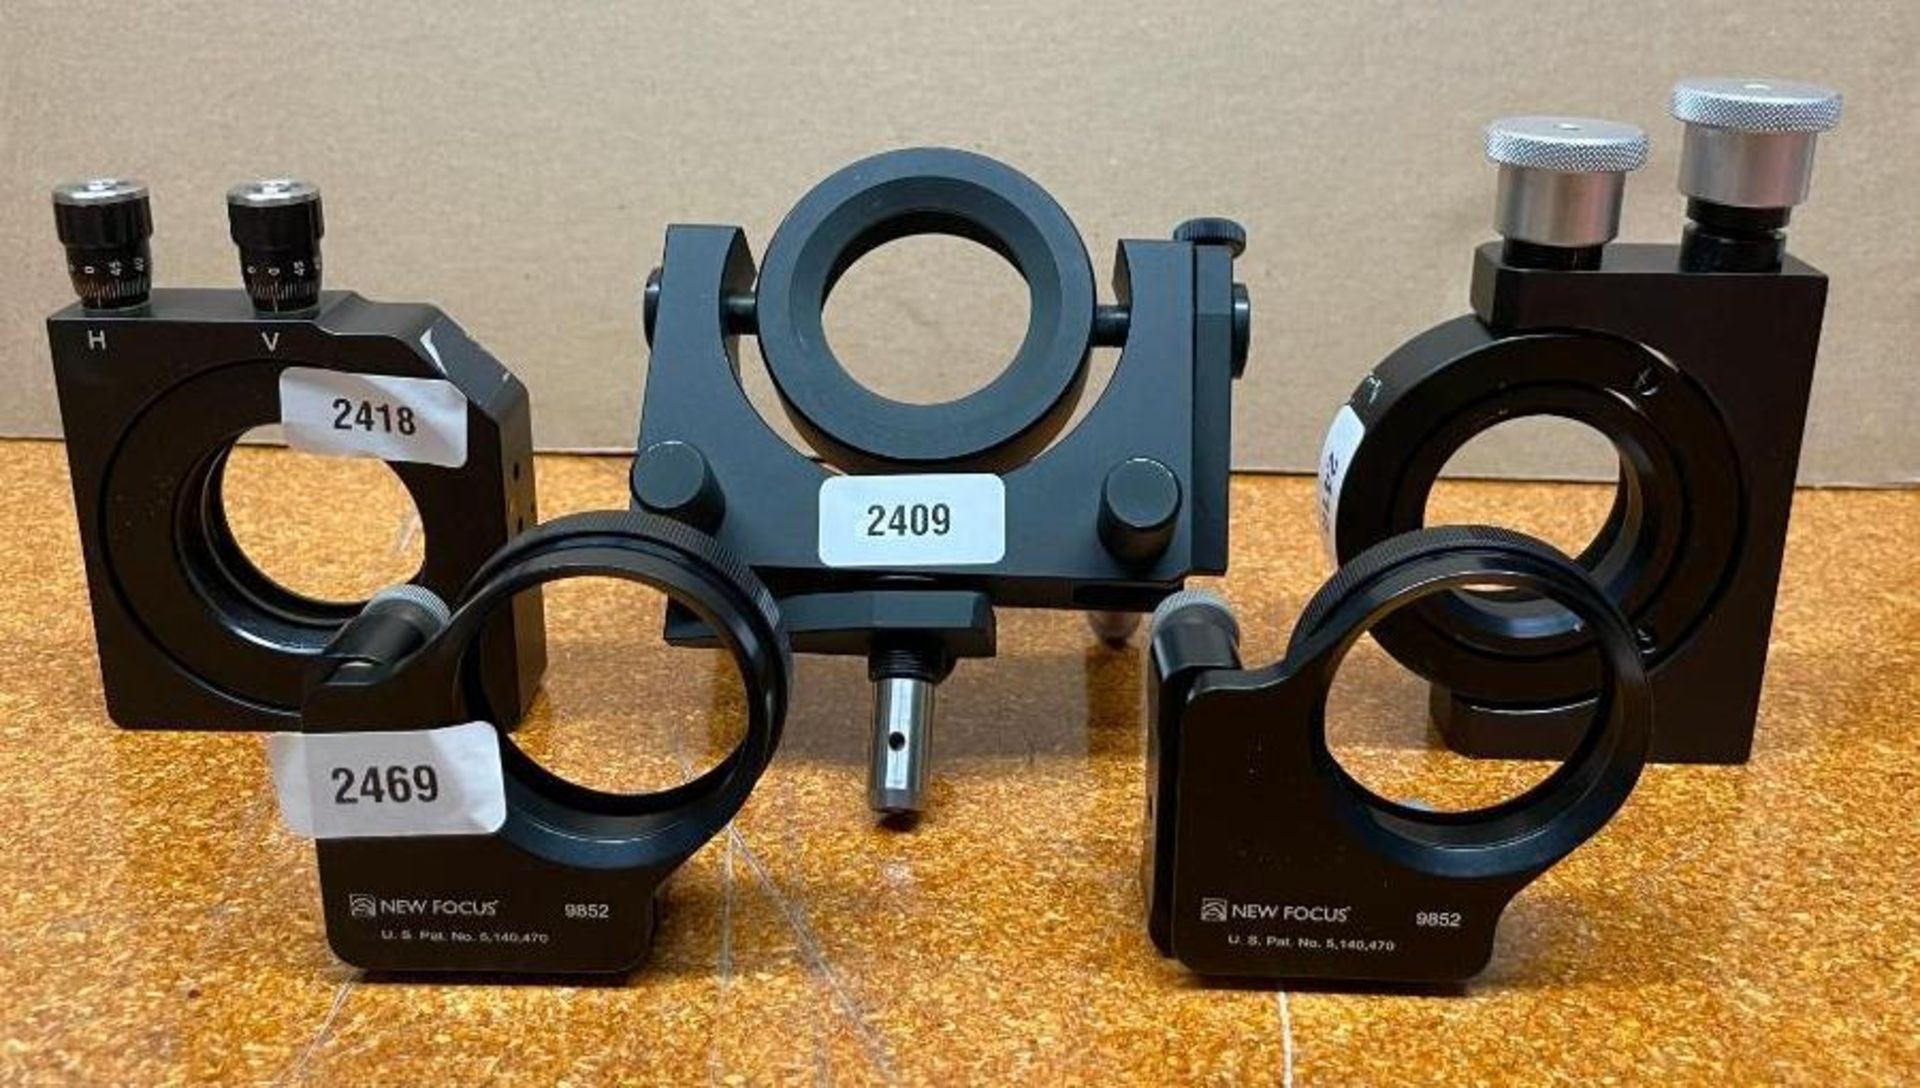 (5) ASSORTED 2" OPTIC MOUNTS BRAND/MODEL: THORLABS RETAIL$: APPROX. $1,000 ORIGINAL RETAIL FOR LOT Q